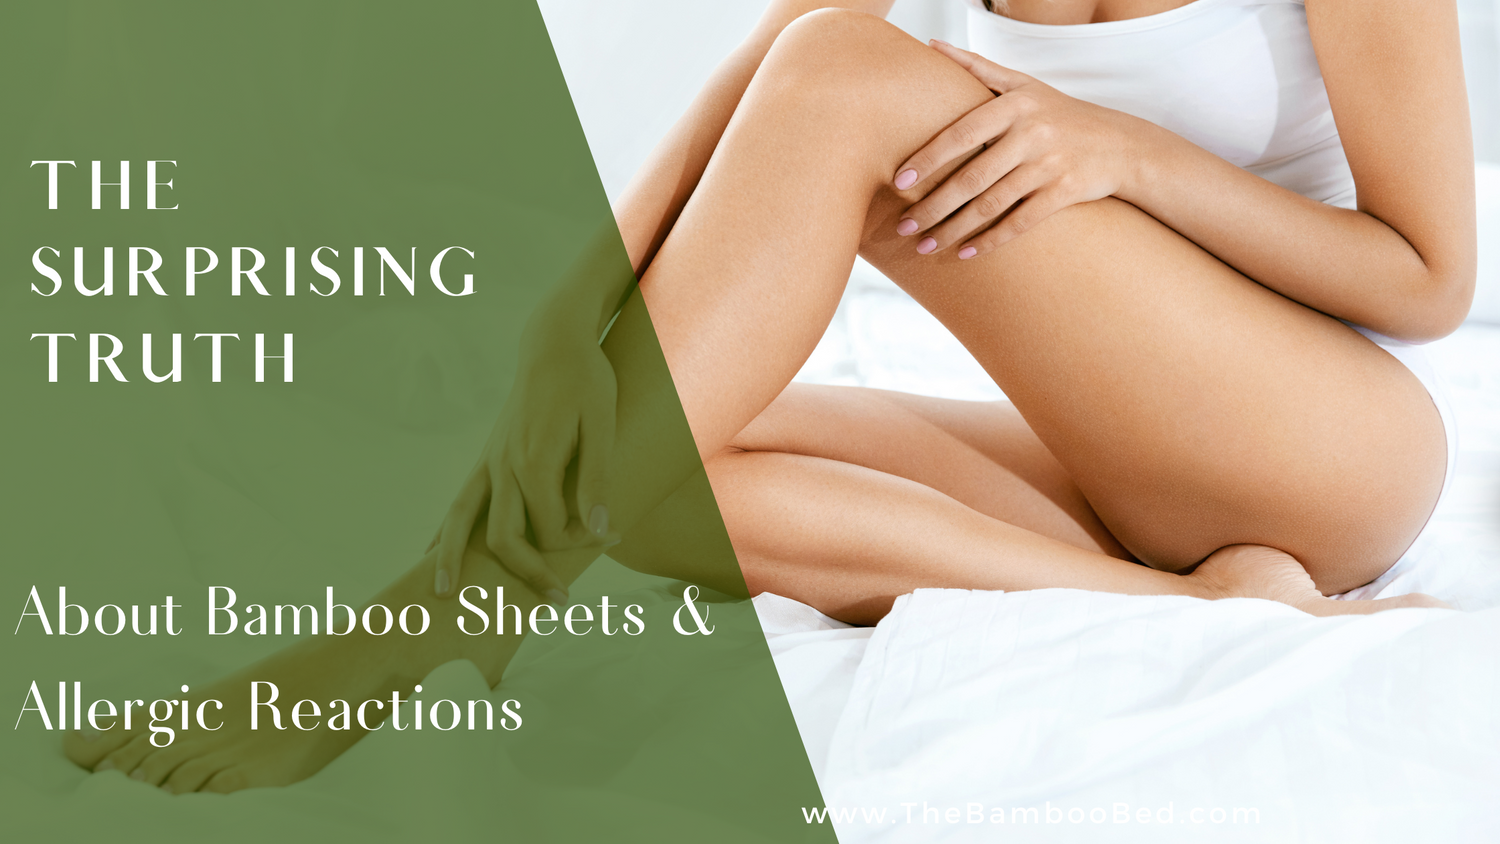 The Surprising Truth About Bamboo Sheets and Allergic Reactions